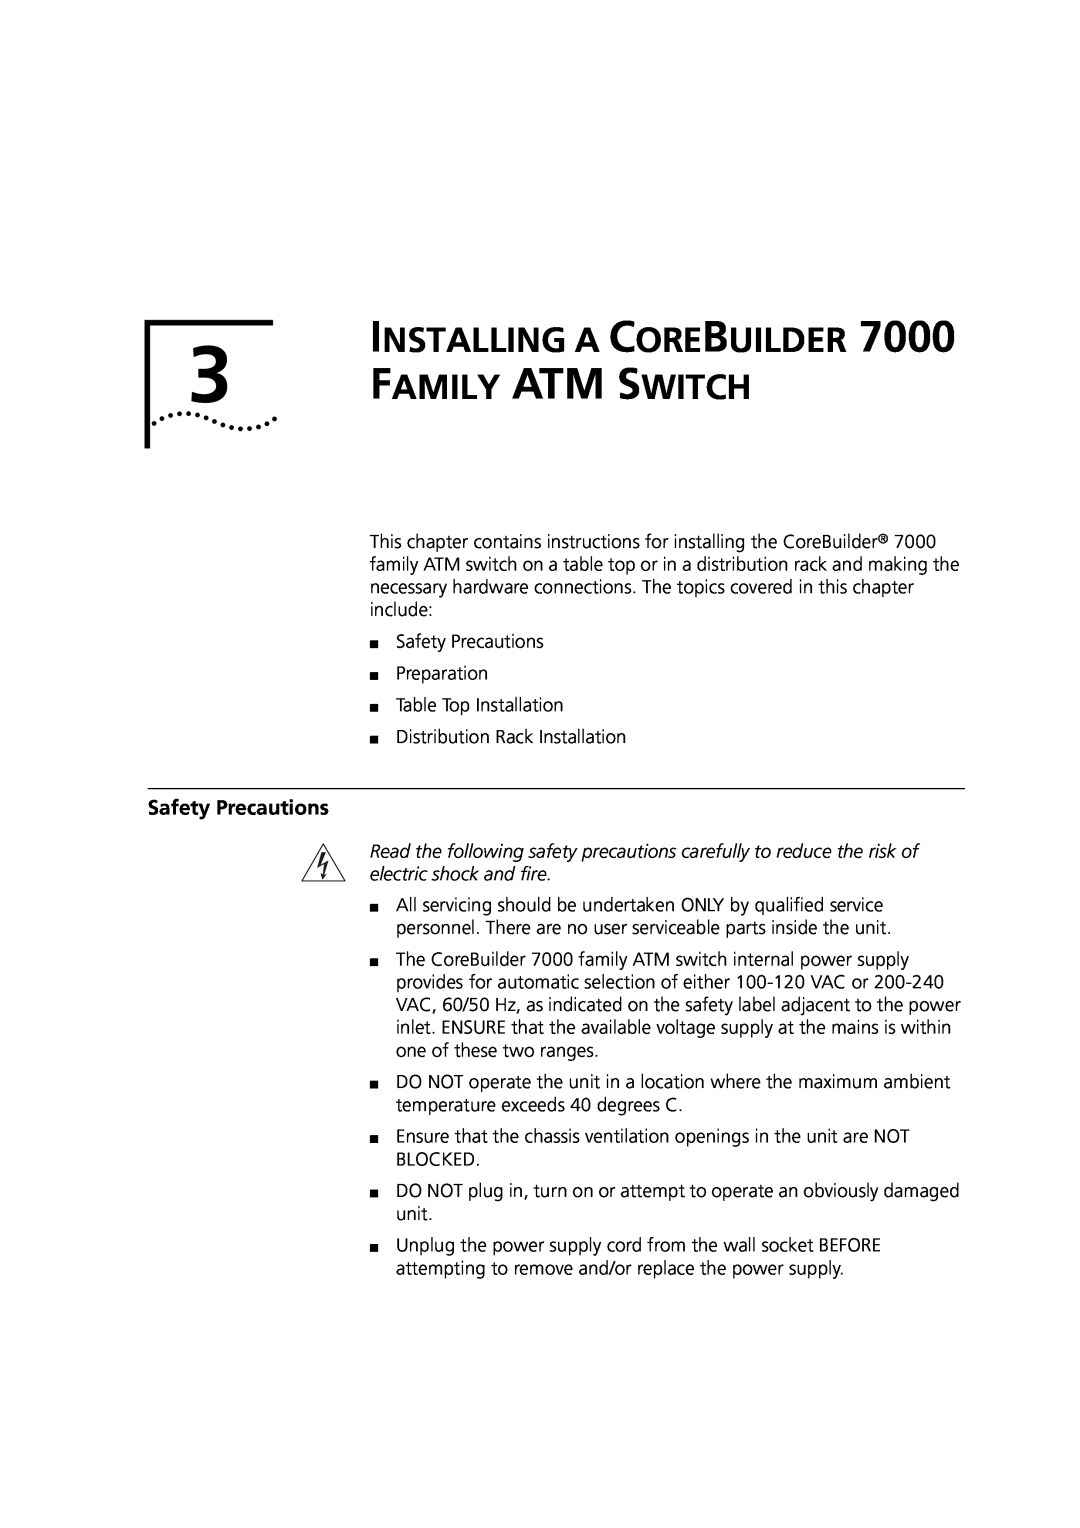 3Com 7000 manual Family Atm Switch, Safety Precautions, Installing A Core Builder 